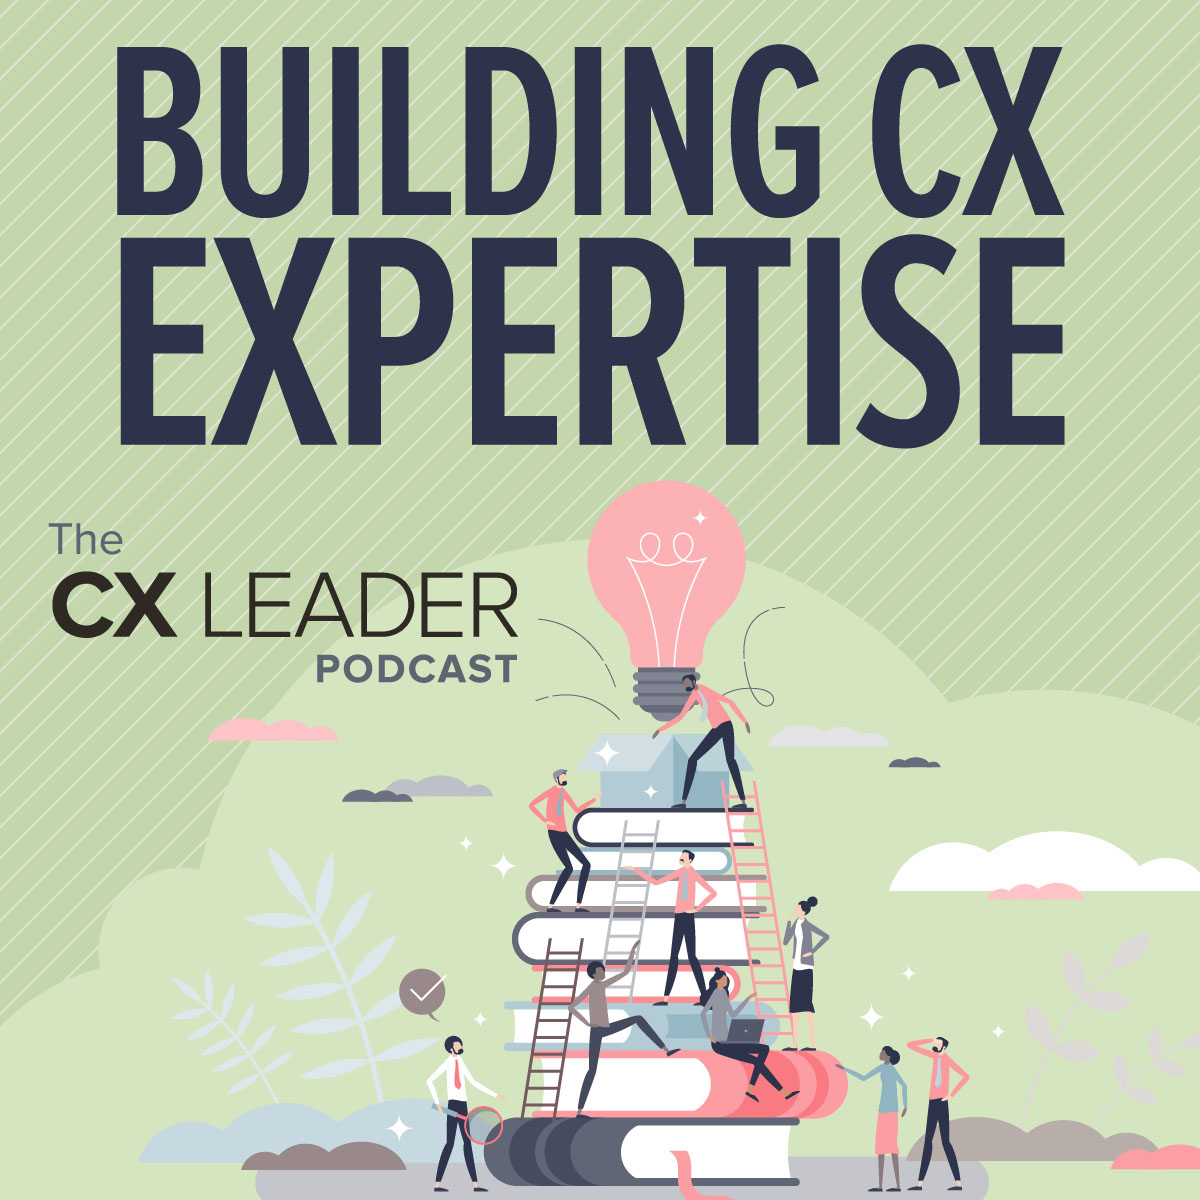 Building CX Expertise